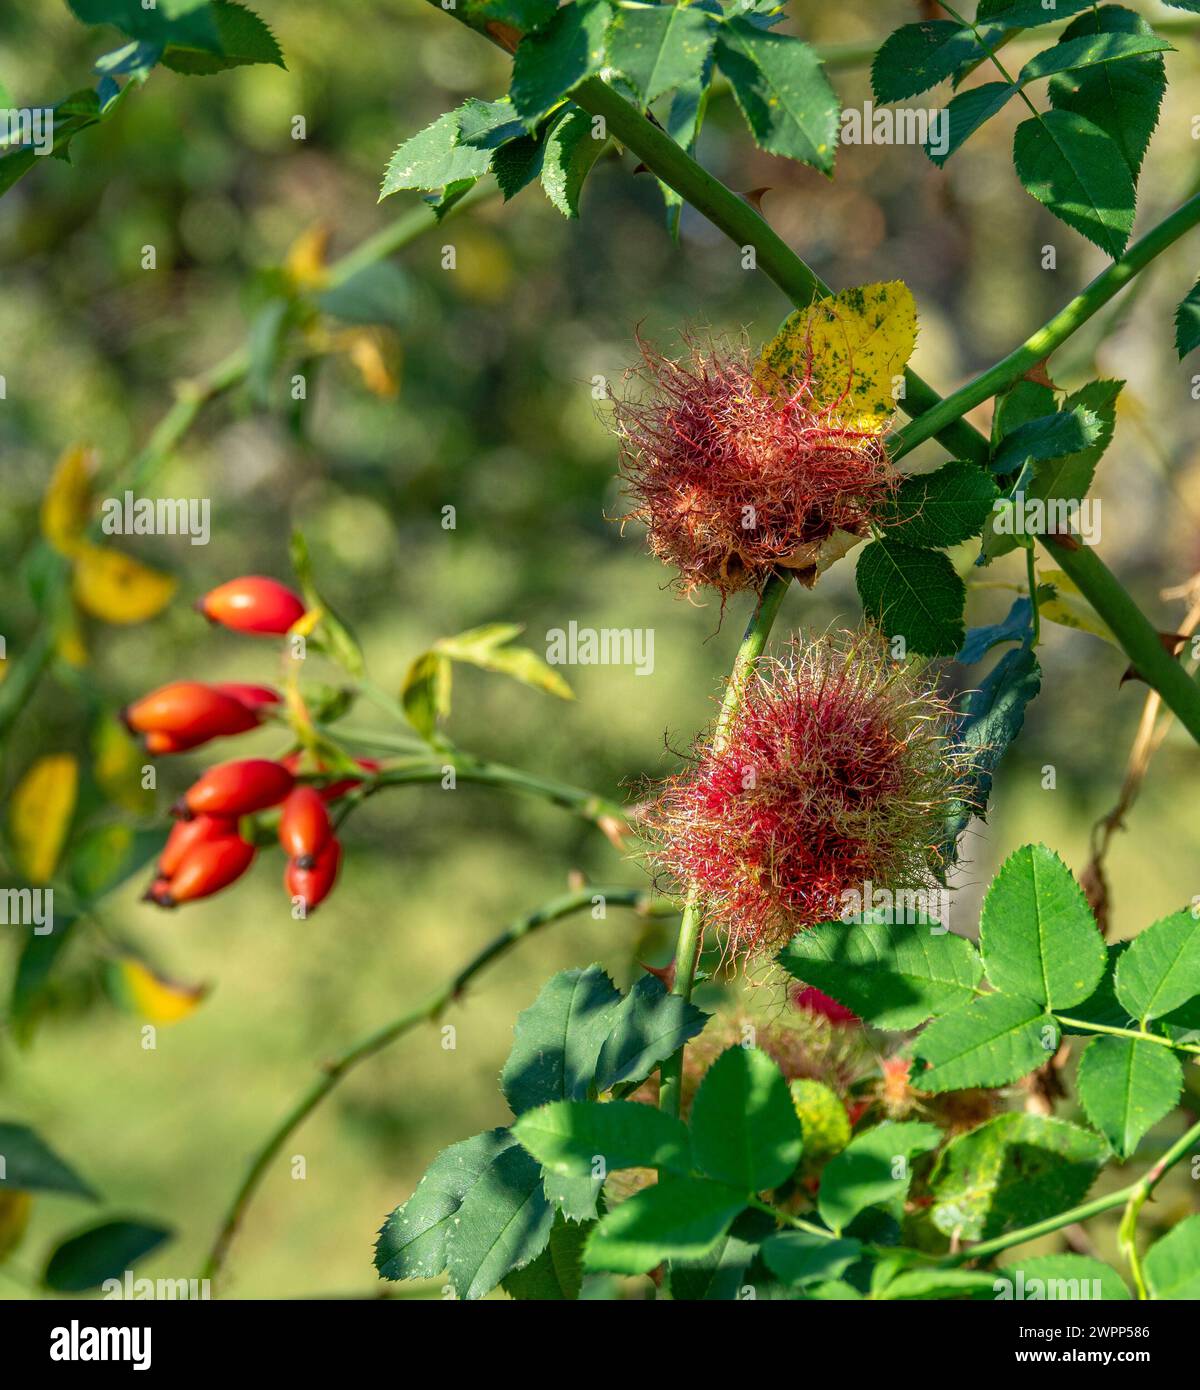 Rose gall, sleeping apple of the common rose gall wasp (Diplolepis rosae). The rose gall has a diameter of up to five centimeters and contains several chambers in which the larvae of the rose gall wasp develop. Stock Photo